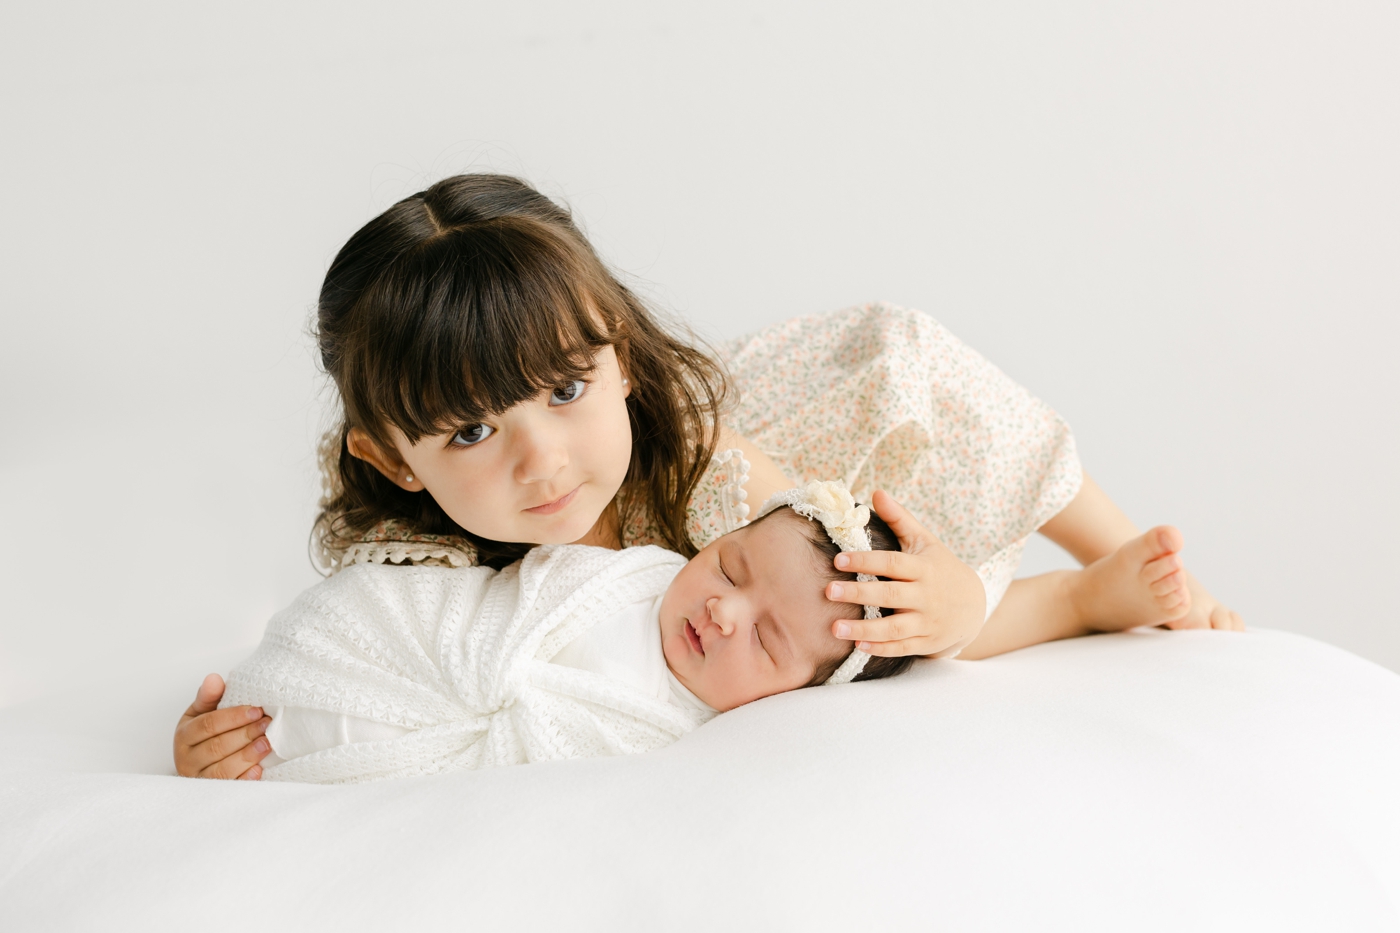 Big sister hugging baby in white swaddle during Cedar Park studio newborn session. Photo by Sana Ahmed Photography.